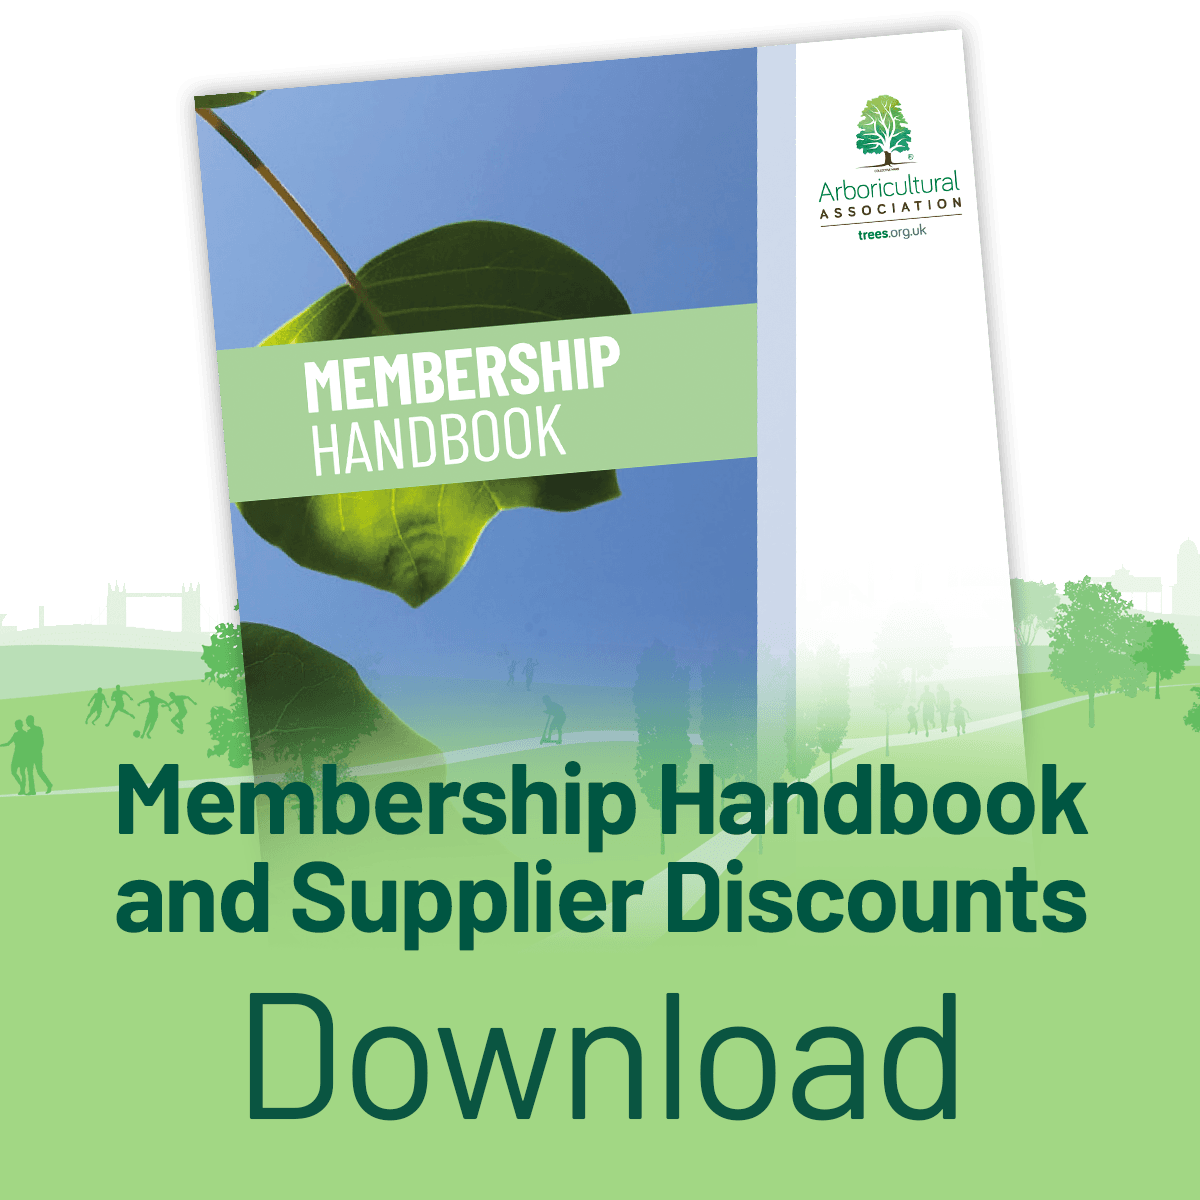 Click here to download the Members Handbook